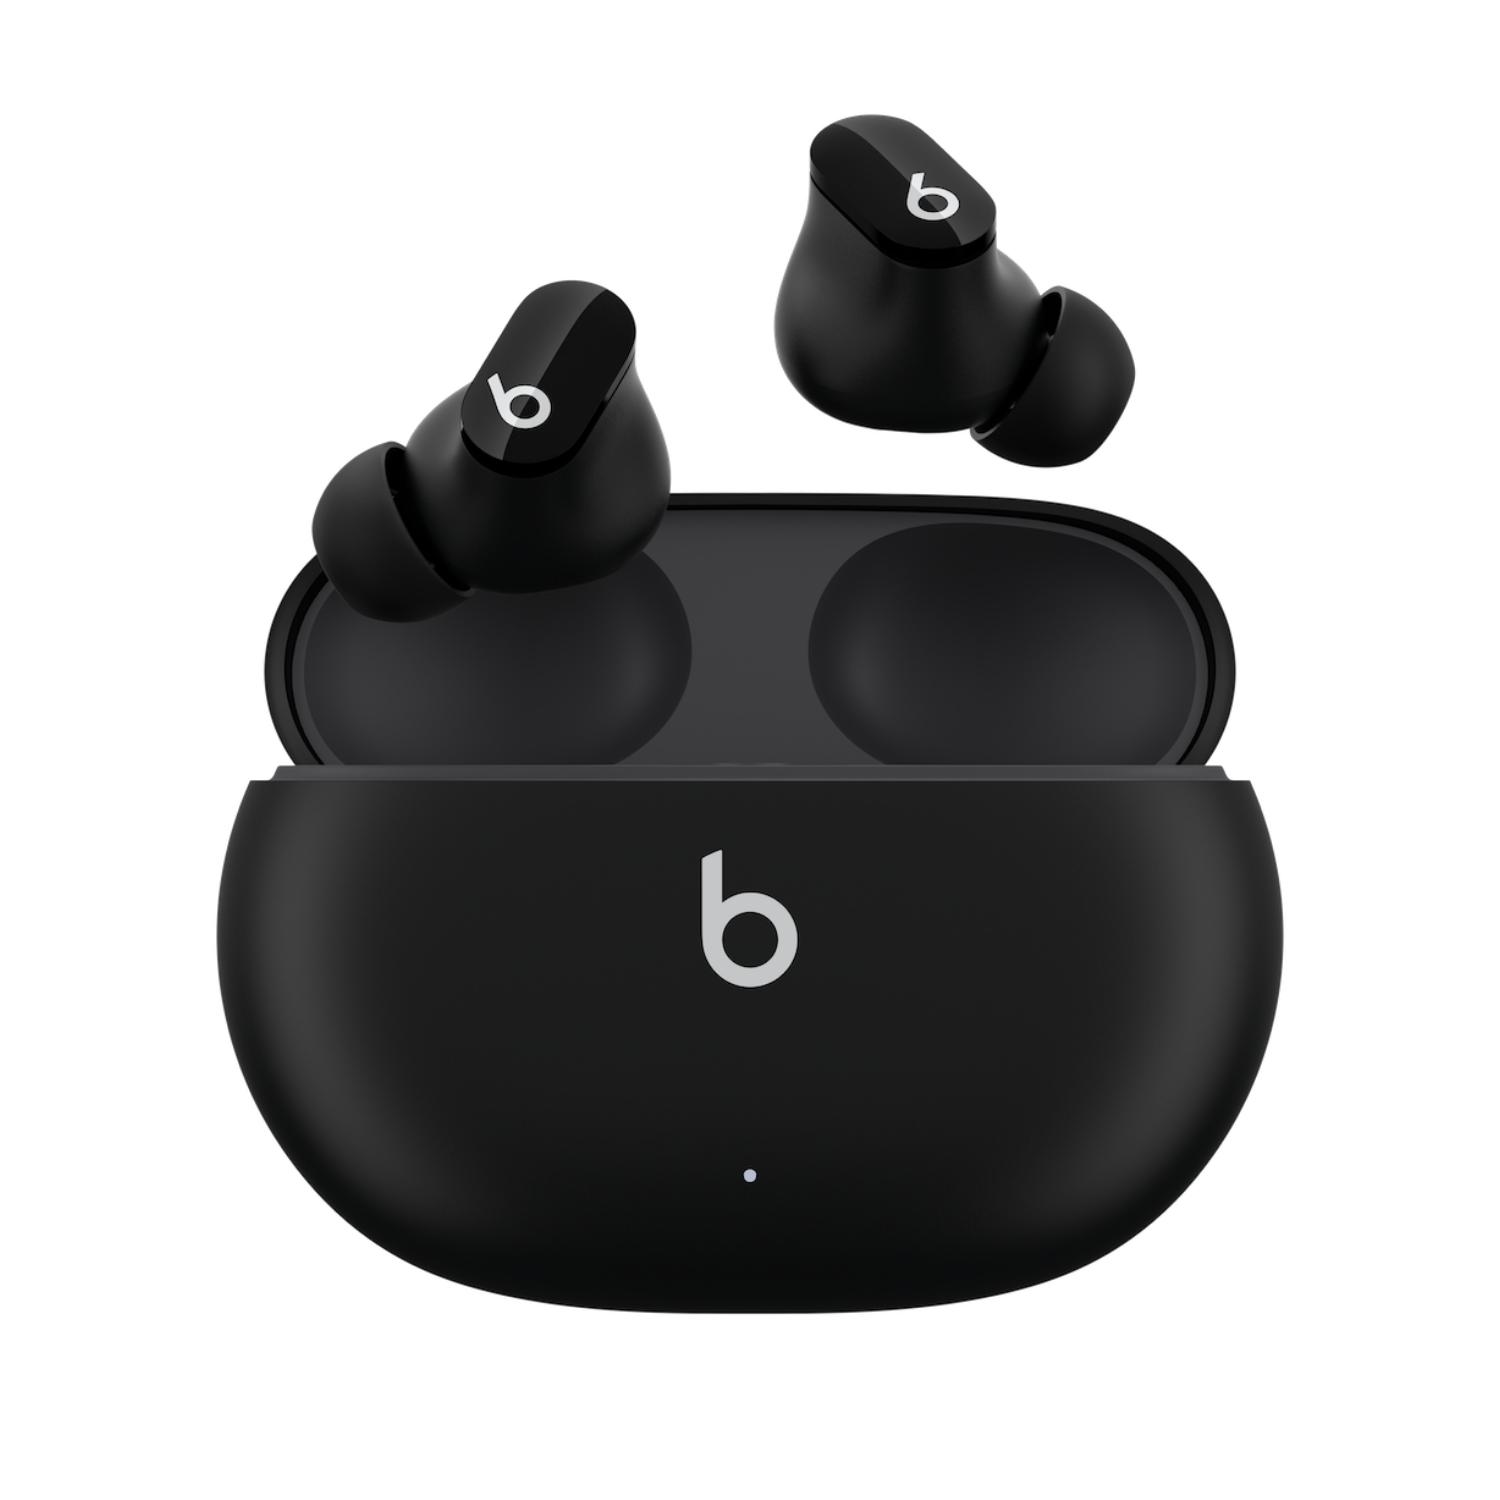 BEATS Studio Buds Wireless Bluetooth Noise-Cancelling Earbuds - Black